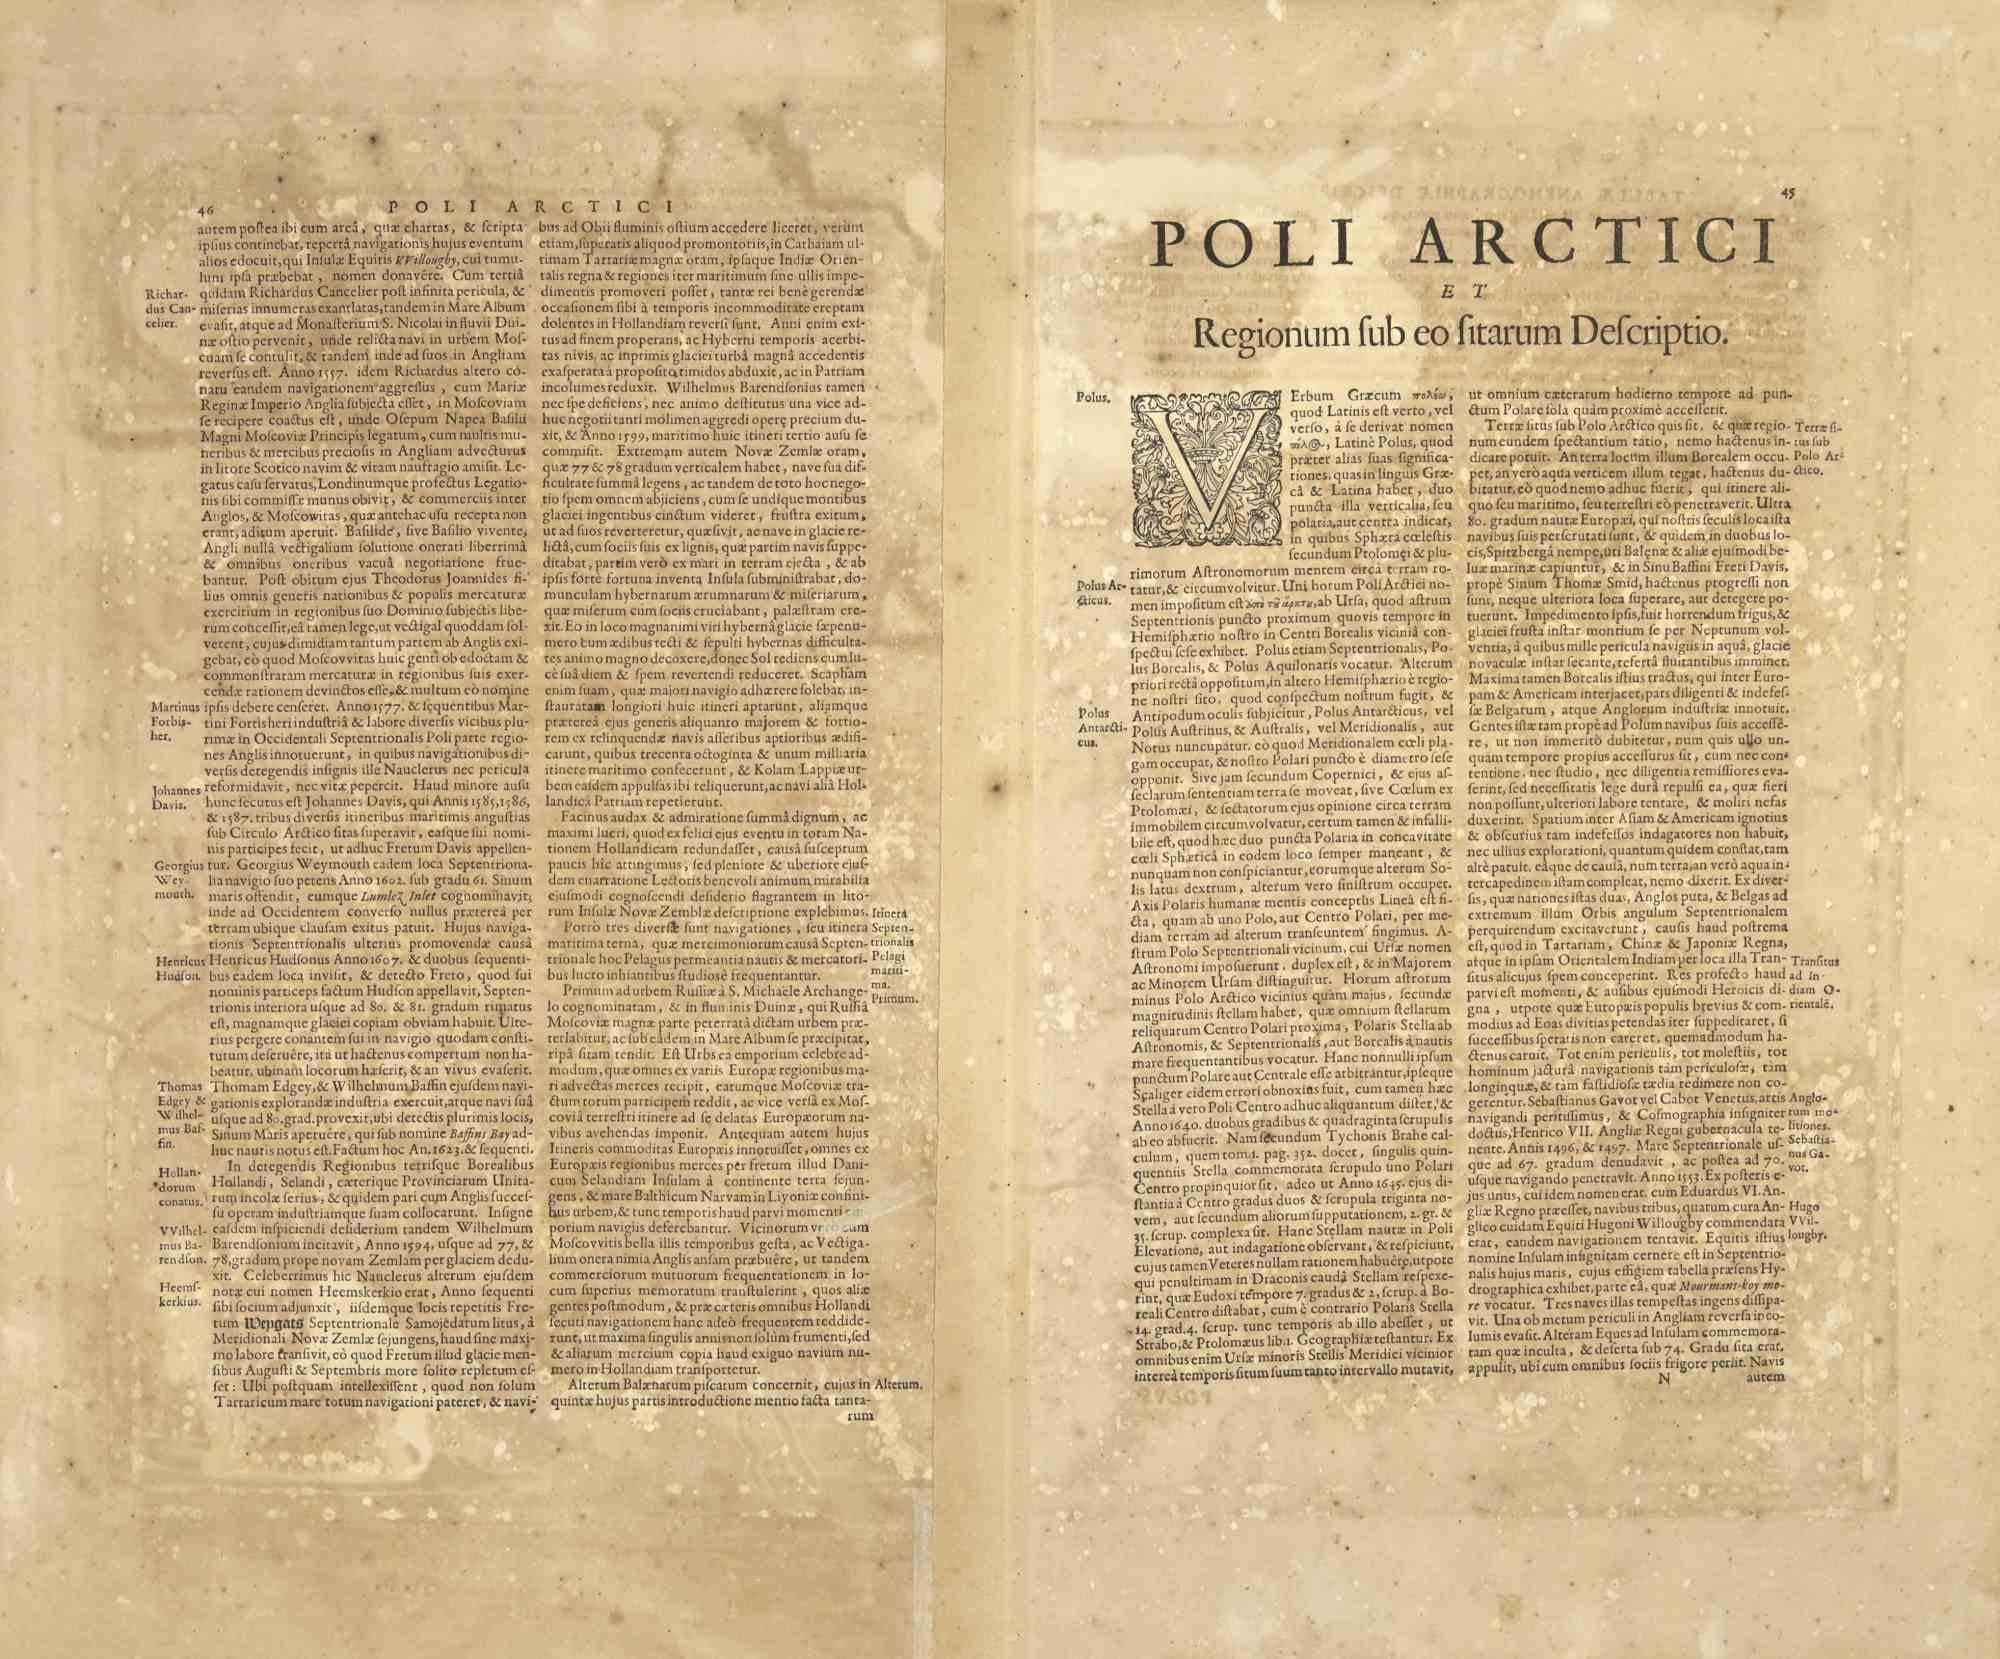 Poli Arctici is an ancient map realized in 1650 by Johannes Janssonius (1588-1664).

The Map is a Hand-colored etching, with coeval watercoloring.

Good conditions with slight foxing.

From Atlantis majoris quinta pars, Orbem maritimum [Novus Atlas,